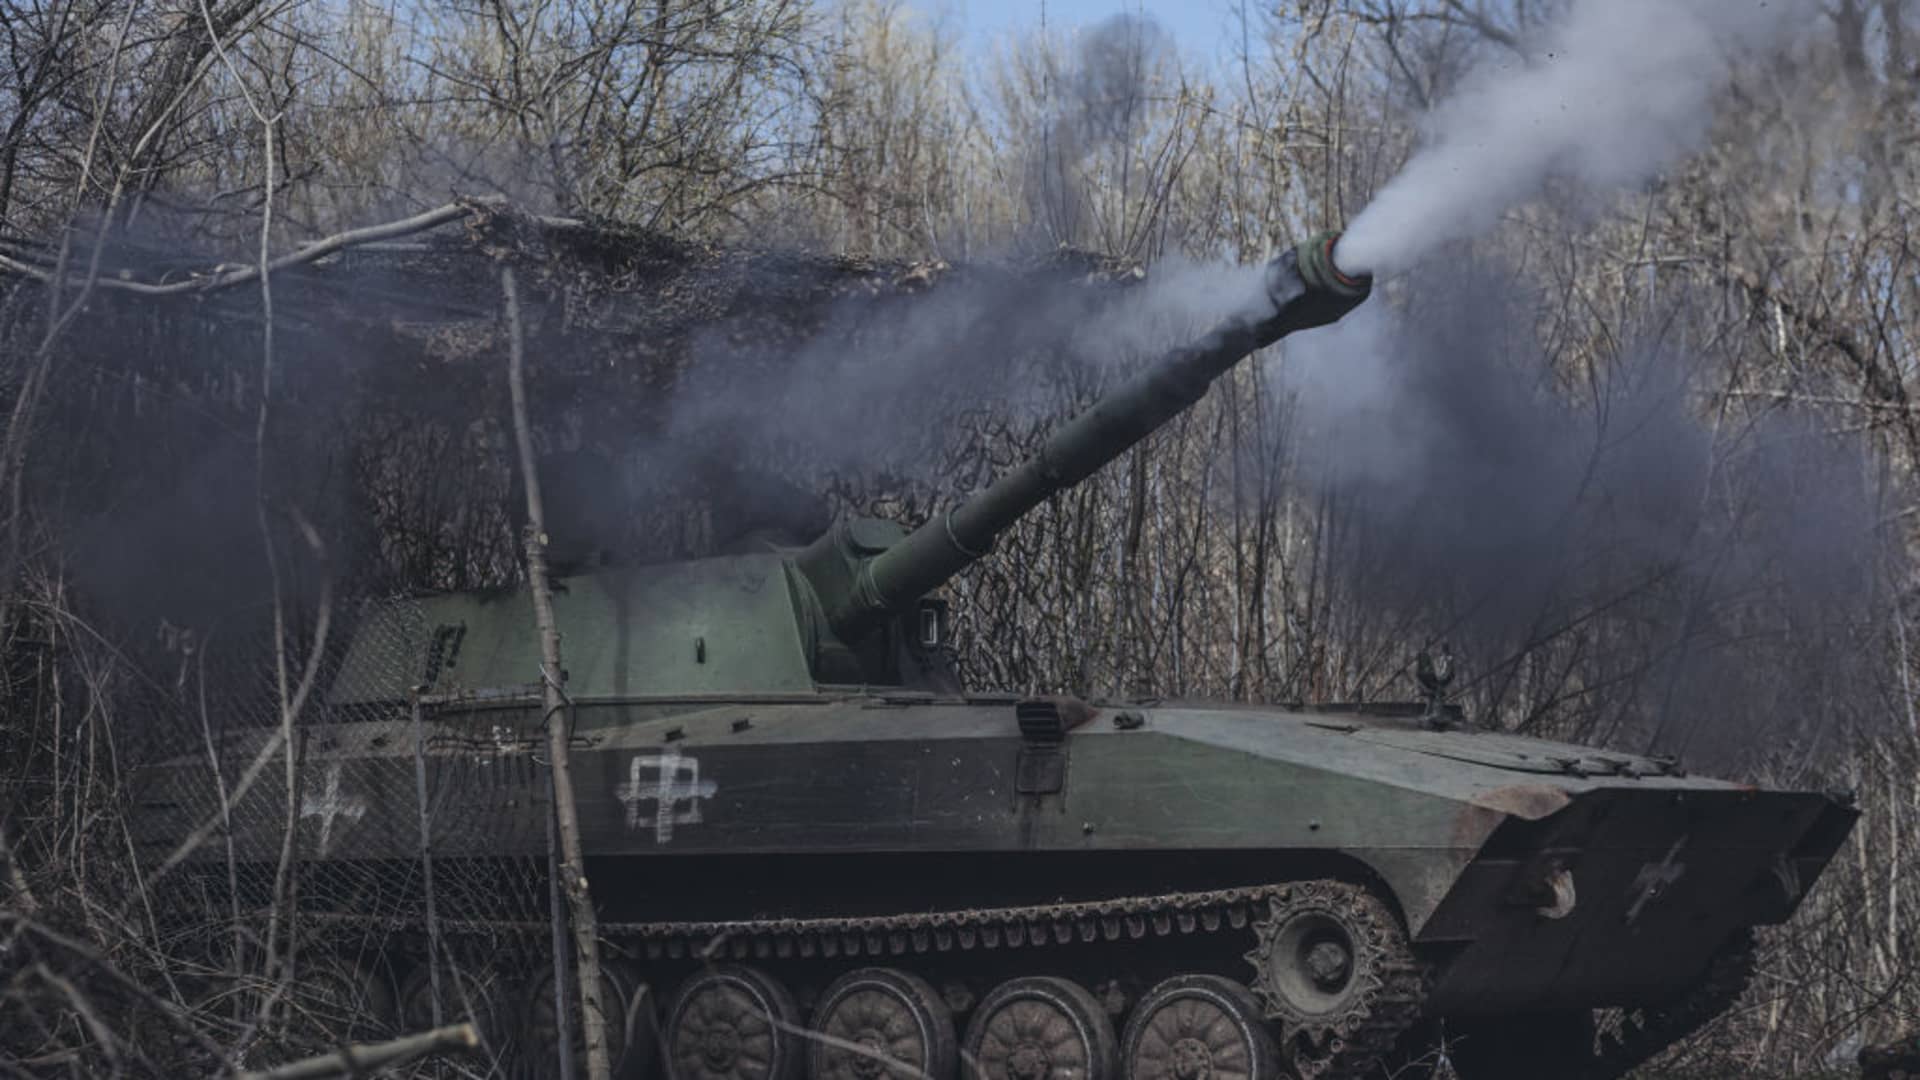 DONETSK OBLAST, UKRAINE - MARCH 26: 80th Brigade tank fires in the direction of Bakhmut, 26 March 2023 (Photo by Diego Herrera Carcedo/Anadolu Agency via Getty Images)